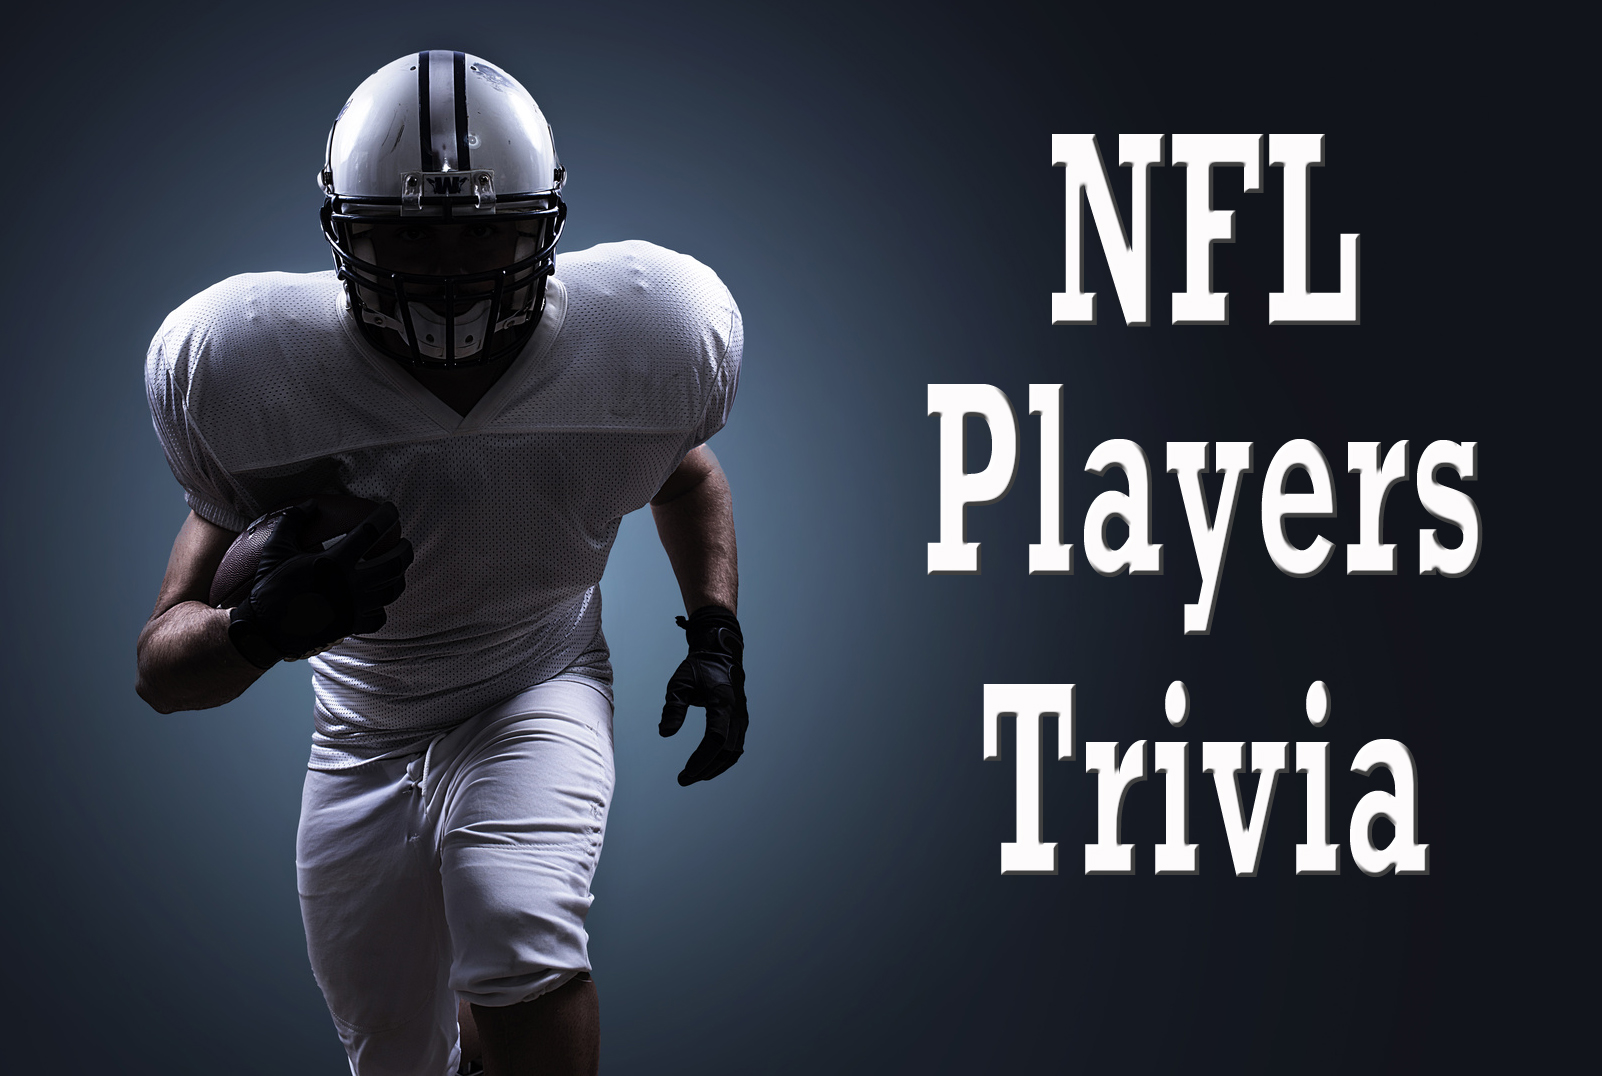 Top 5 of youngest NFL players in history